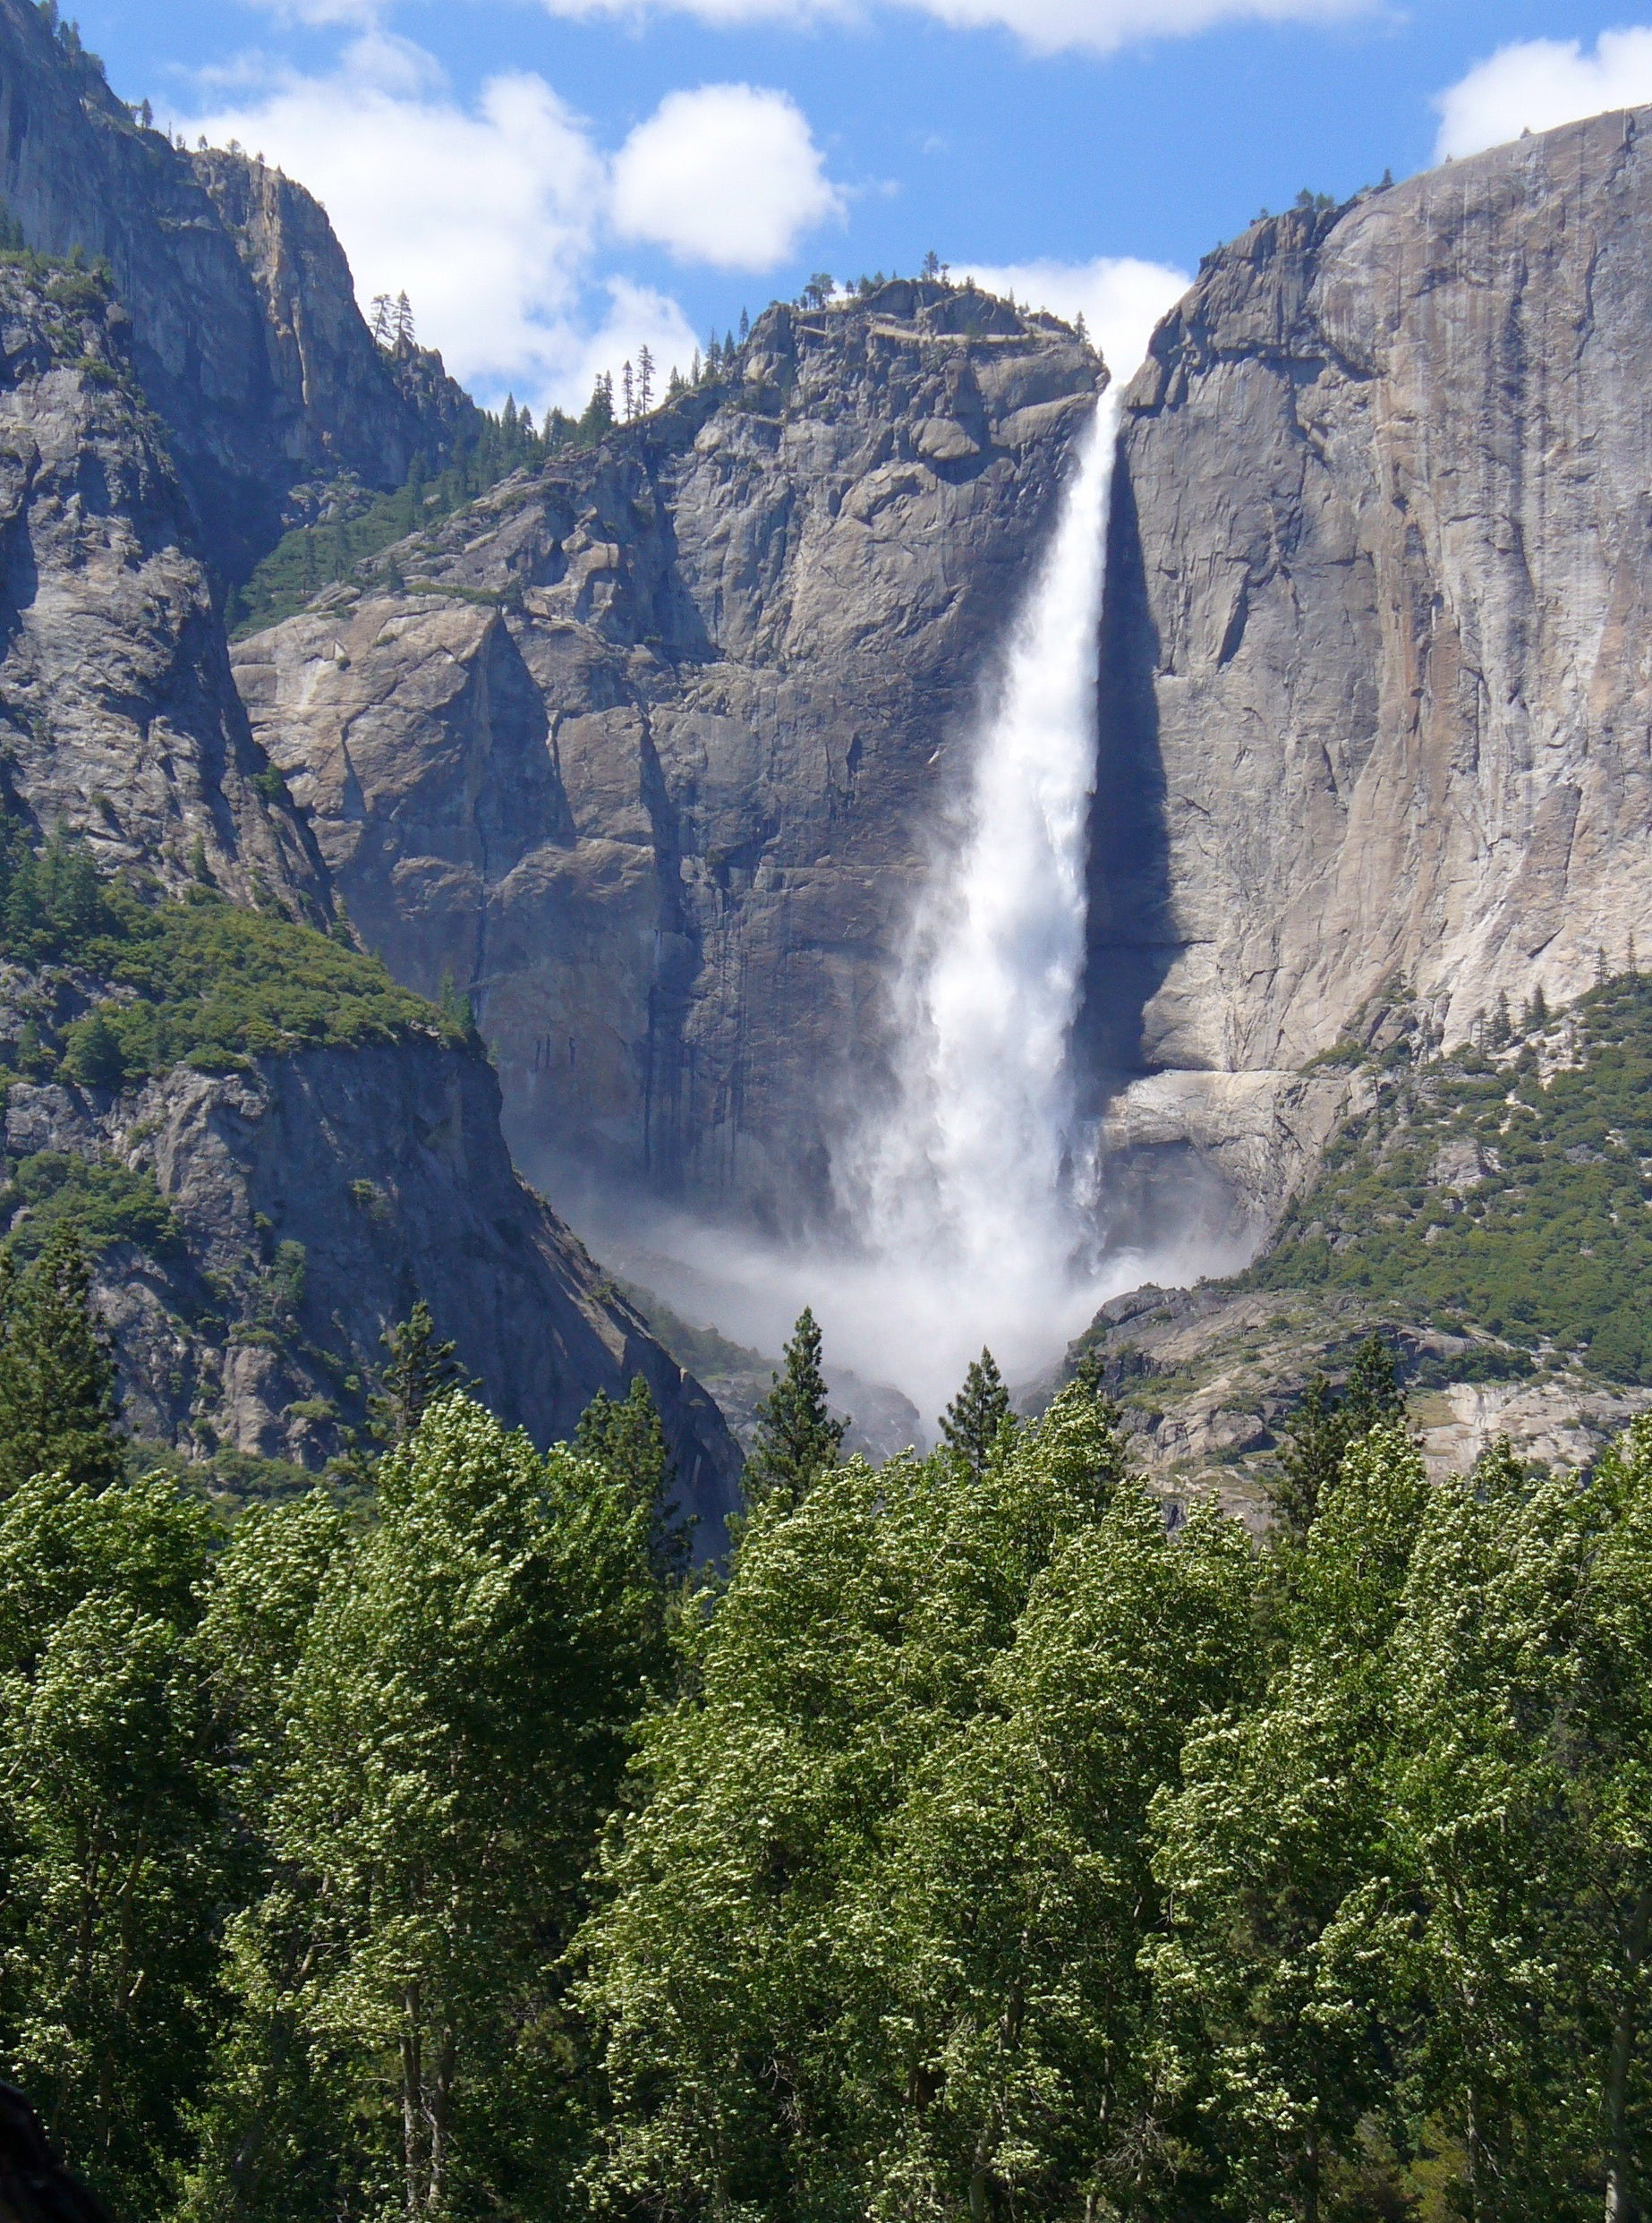 Waterfall and landscape in Yosemite National Park, California image